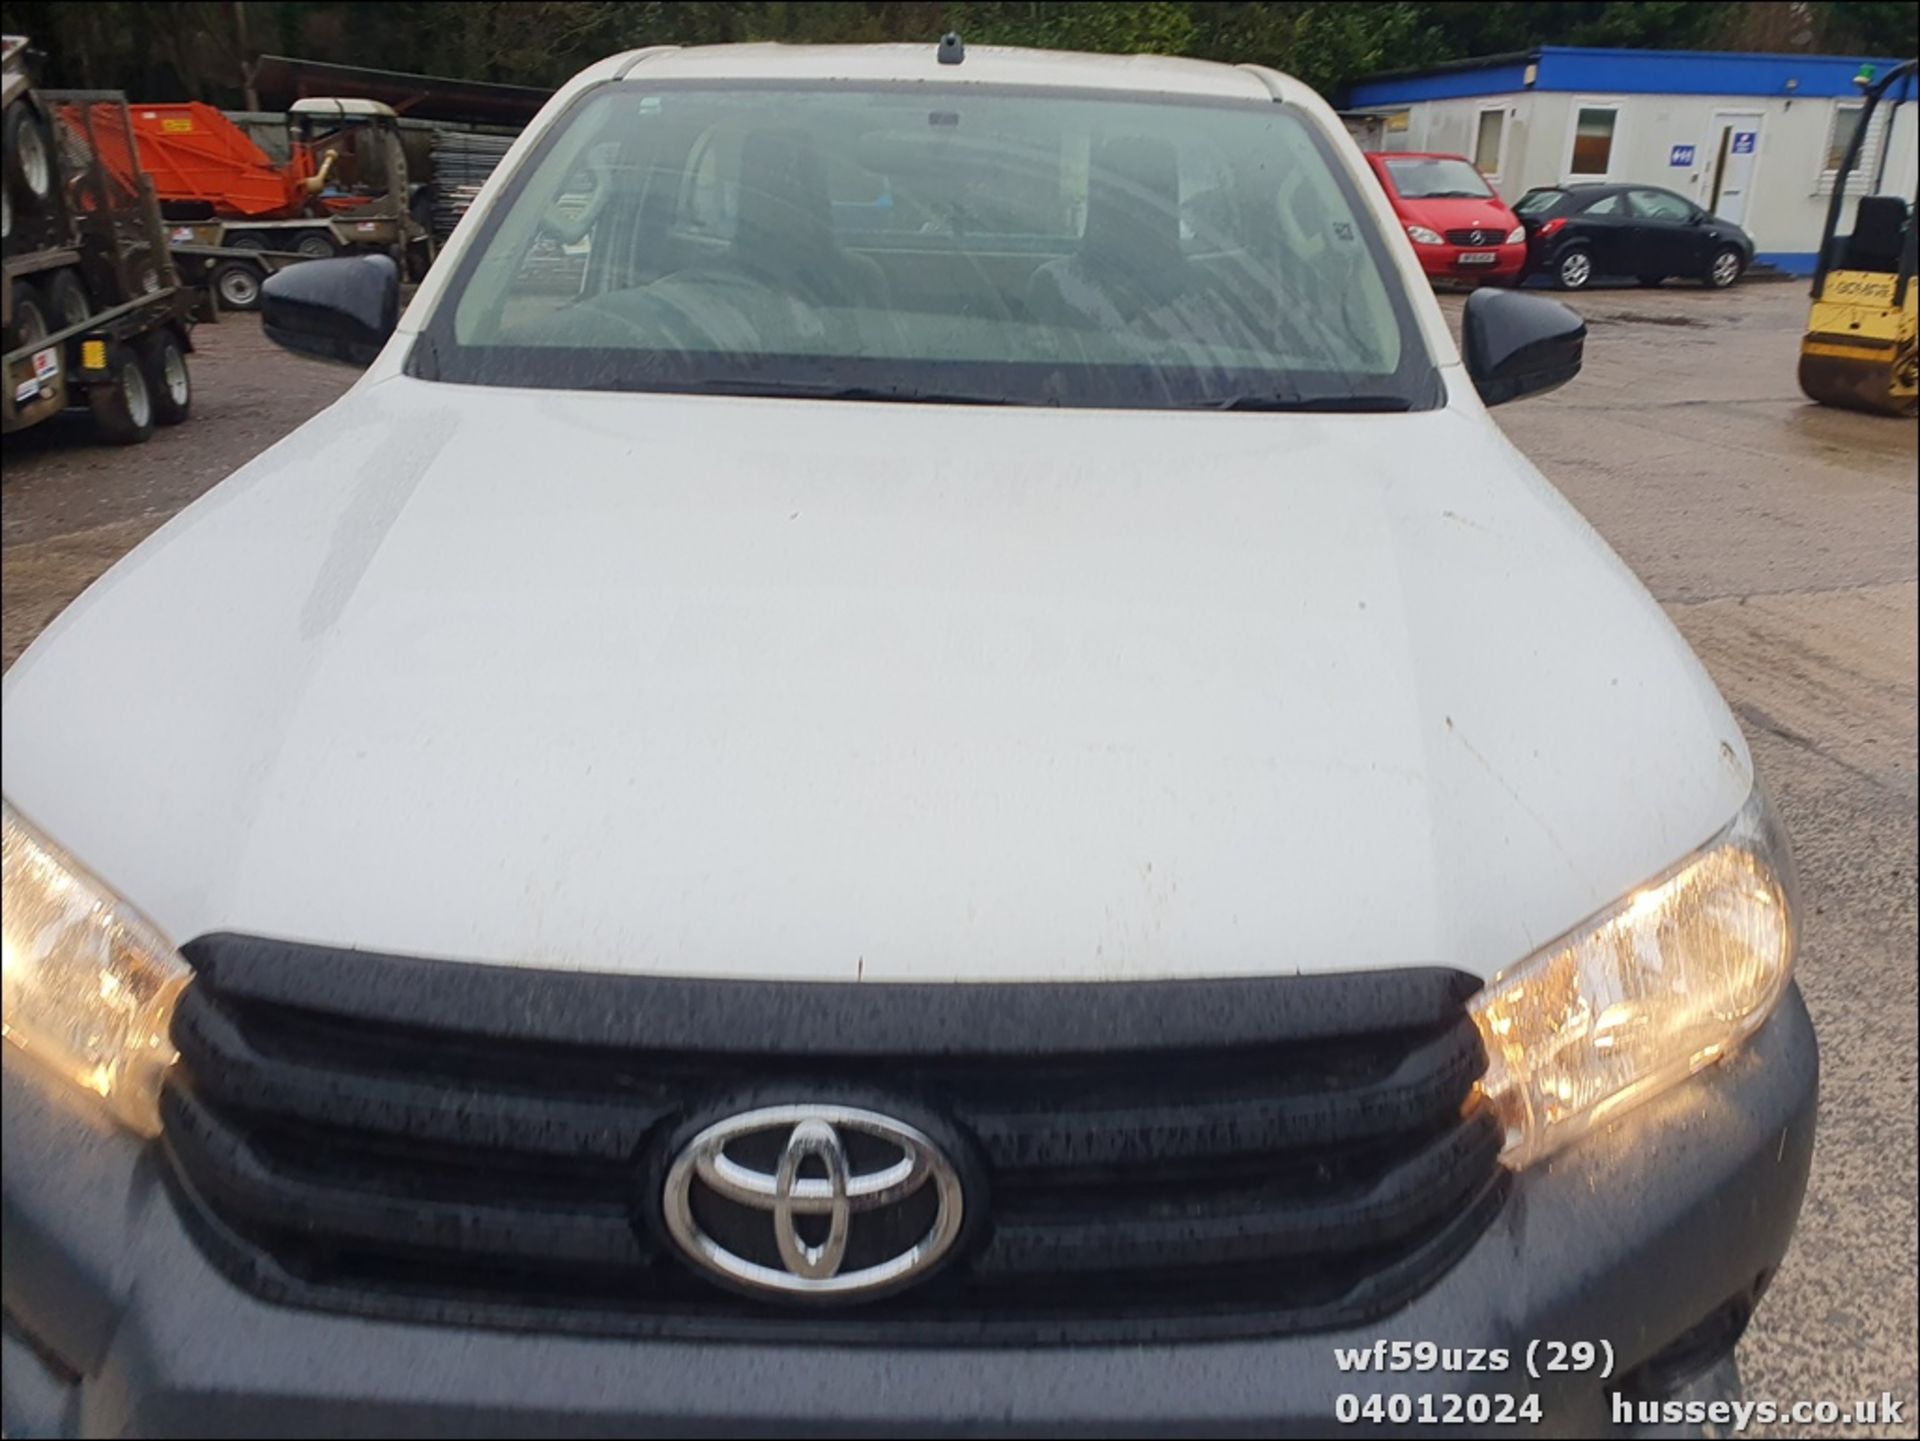 19/69 TOYOTA HILUX ACTIVE D-4D 4WD S/C - 2393cc 2dr 4x4 (White, 150k) - Image 31 of 50